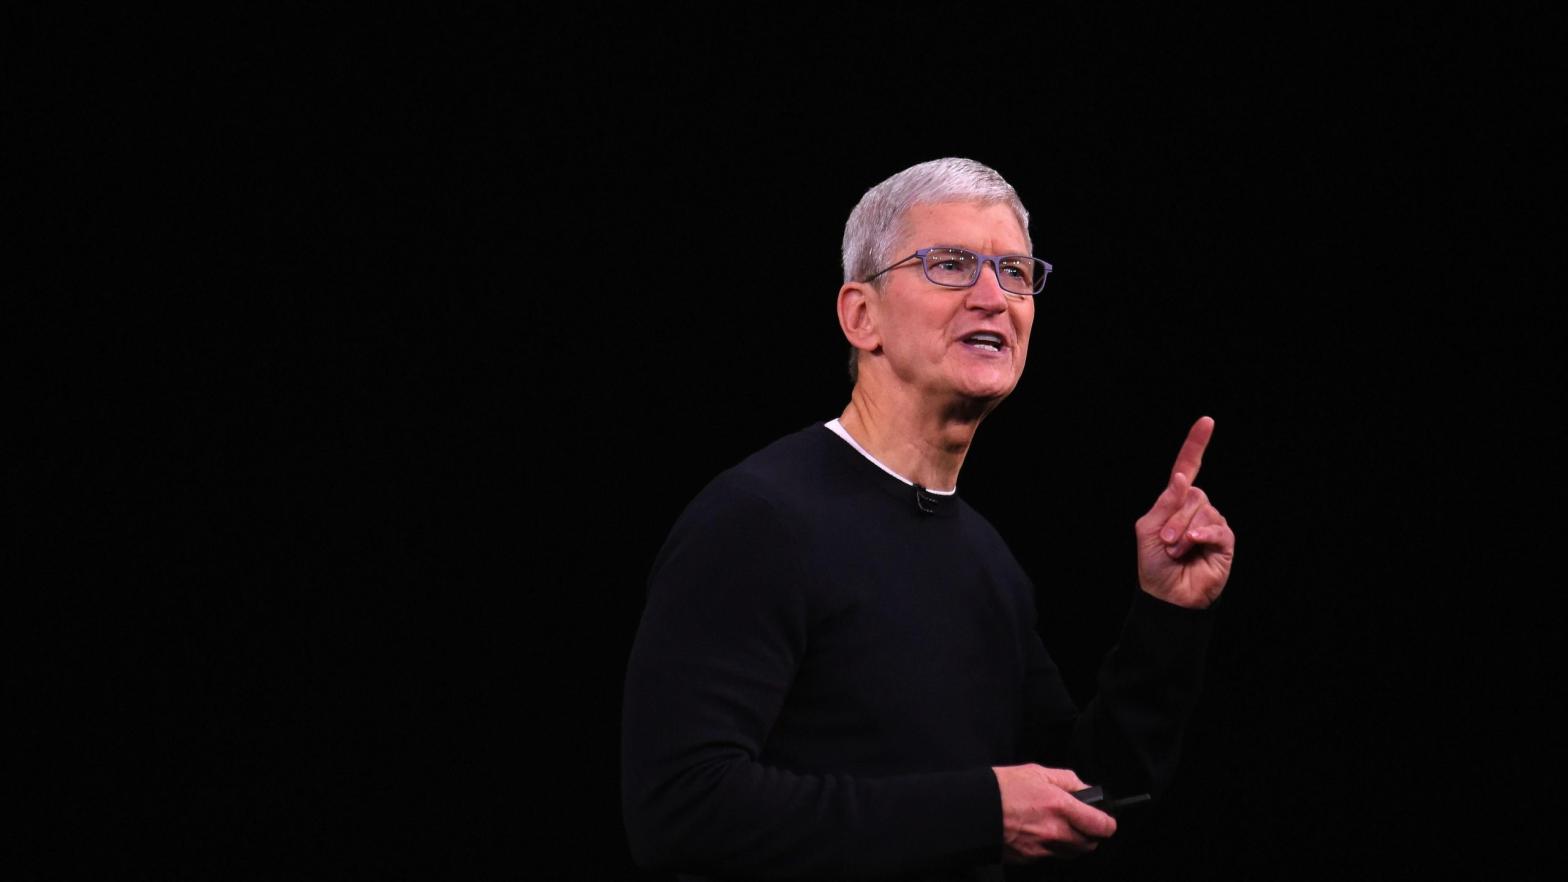 Apple CEO Tim Cook speaks on-stage during a product launch event at Apple's headquarters in Cupertino, California, on September 10, 2019. (Photo: Josh Edelson, Getty Images)